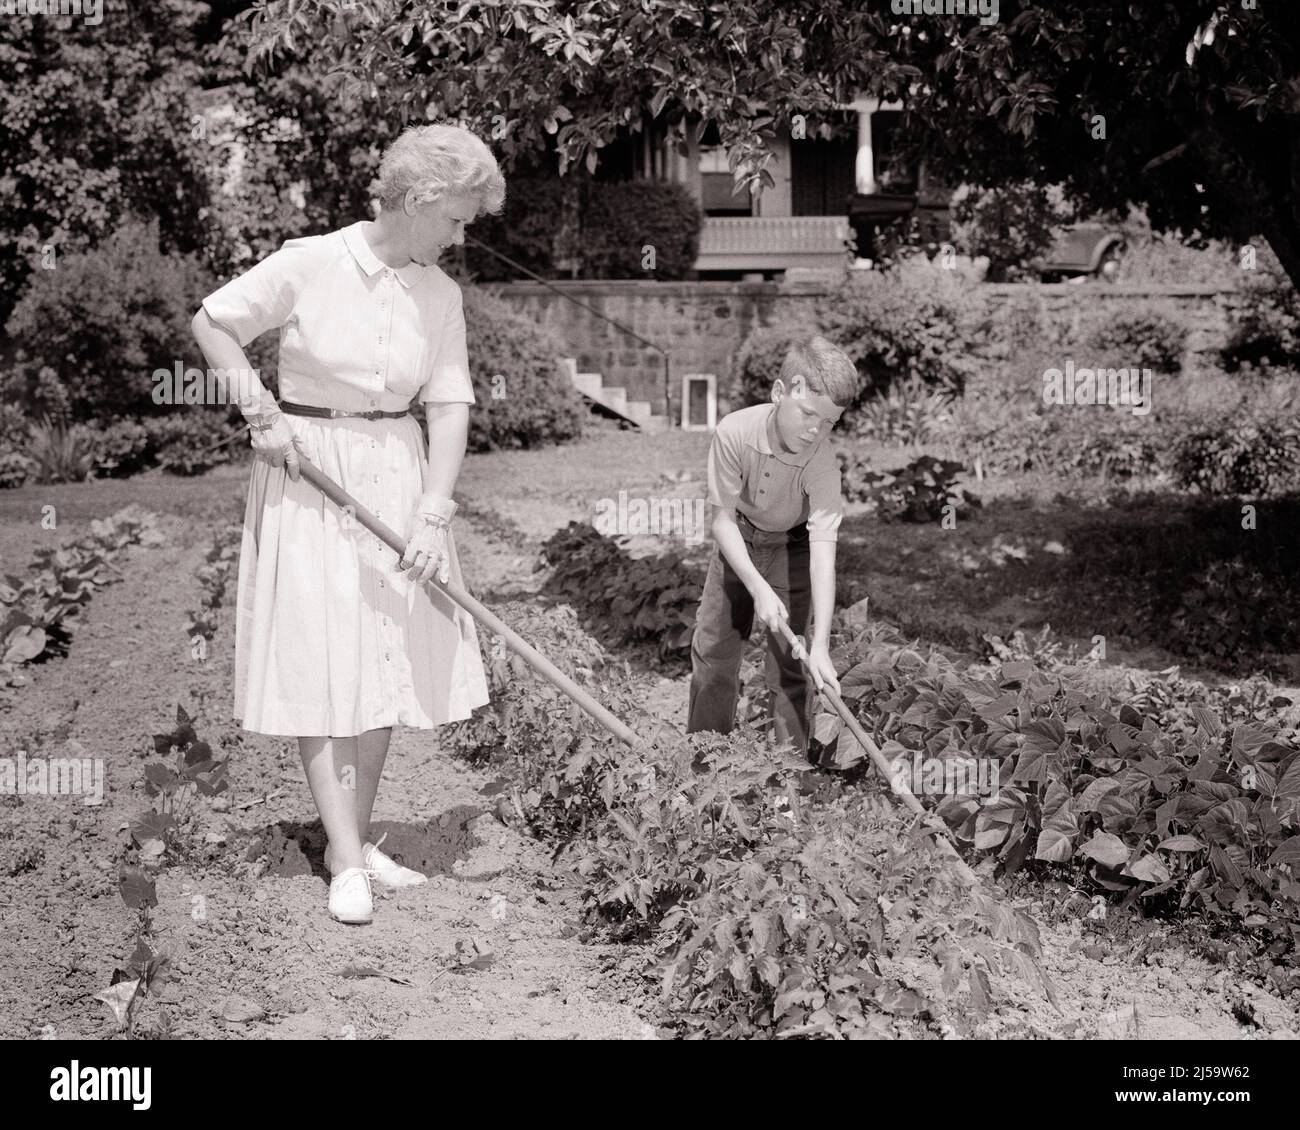 1960s ENERGETIC YOUNG BOY GRANDSON HELPING OLDER WOMAN HIS GRANDMOTHER WORKING IN THE BACKYARD VEGETABLE GARDEN - j11337 HAR001 HARS RURAL HOME LIFE COPY SPACE FULL-LENGTH LADIES PHYSICAL FITNESS PERSONS CARING MALES SENIOR ADULT AGRICULTURE B&W SENIOR WOMAN GOALS SUCCESS HAPPINESS OLD AGE OLDSTERS HIGH ANGLE OLDSTER LEISURE STRENGTH GRANDSONS KNOWLEDGE PRIDE OPPORTUNITY AUTHORITY GRANDMOTHERS ELDERS GRANDSON STYLISH SUPPORT WEEDING COOPERATION JUVENILES TOGETHERNESS BLACK AND WHITE CAUCASIAN ETHNICITY GRANDMA HAR001 OLD FASHIONED Stock Photo